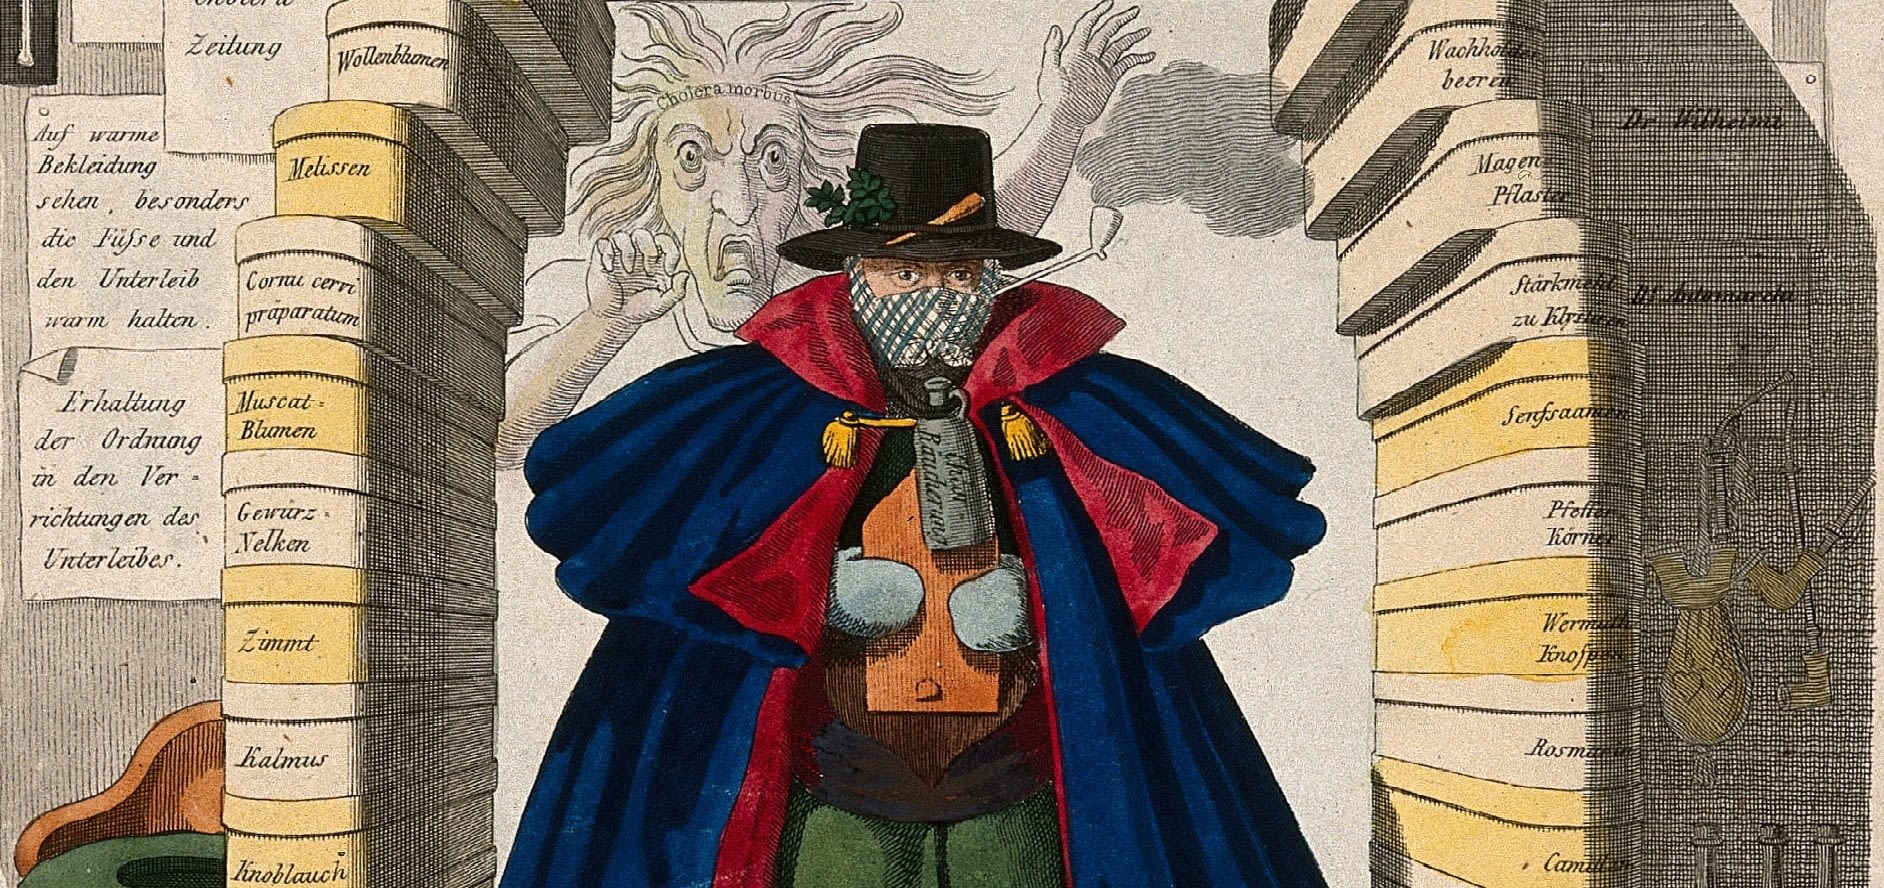 A man wears a panoply of protections against cholera, by J.B. Wunder, c. 1832. Credit: Wellcome Collection. Attribution 4.0 International (CC BY 4.0)